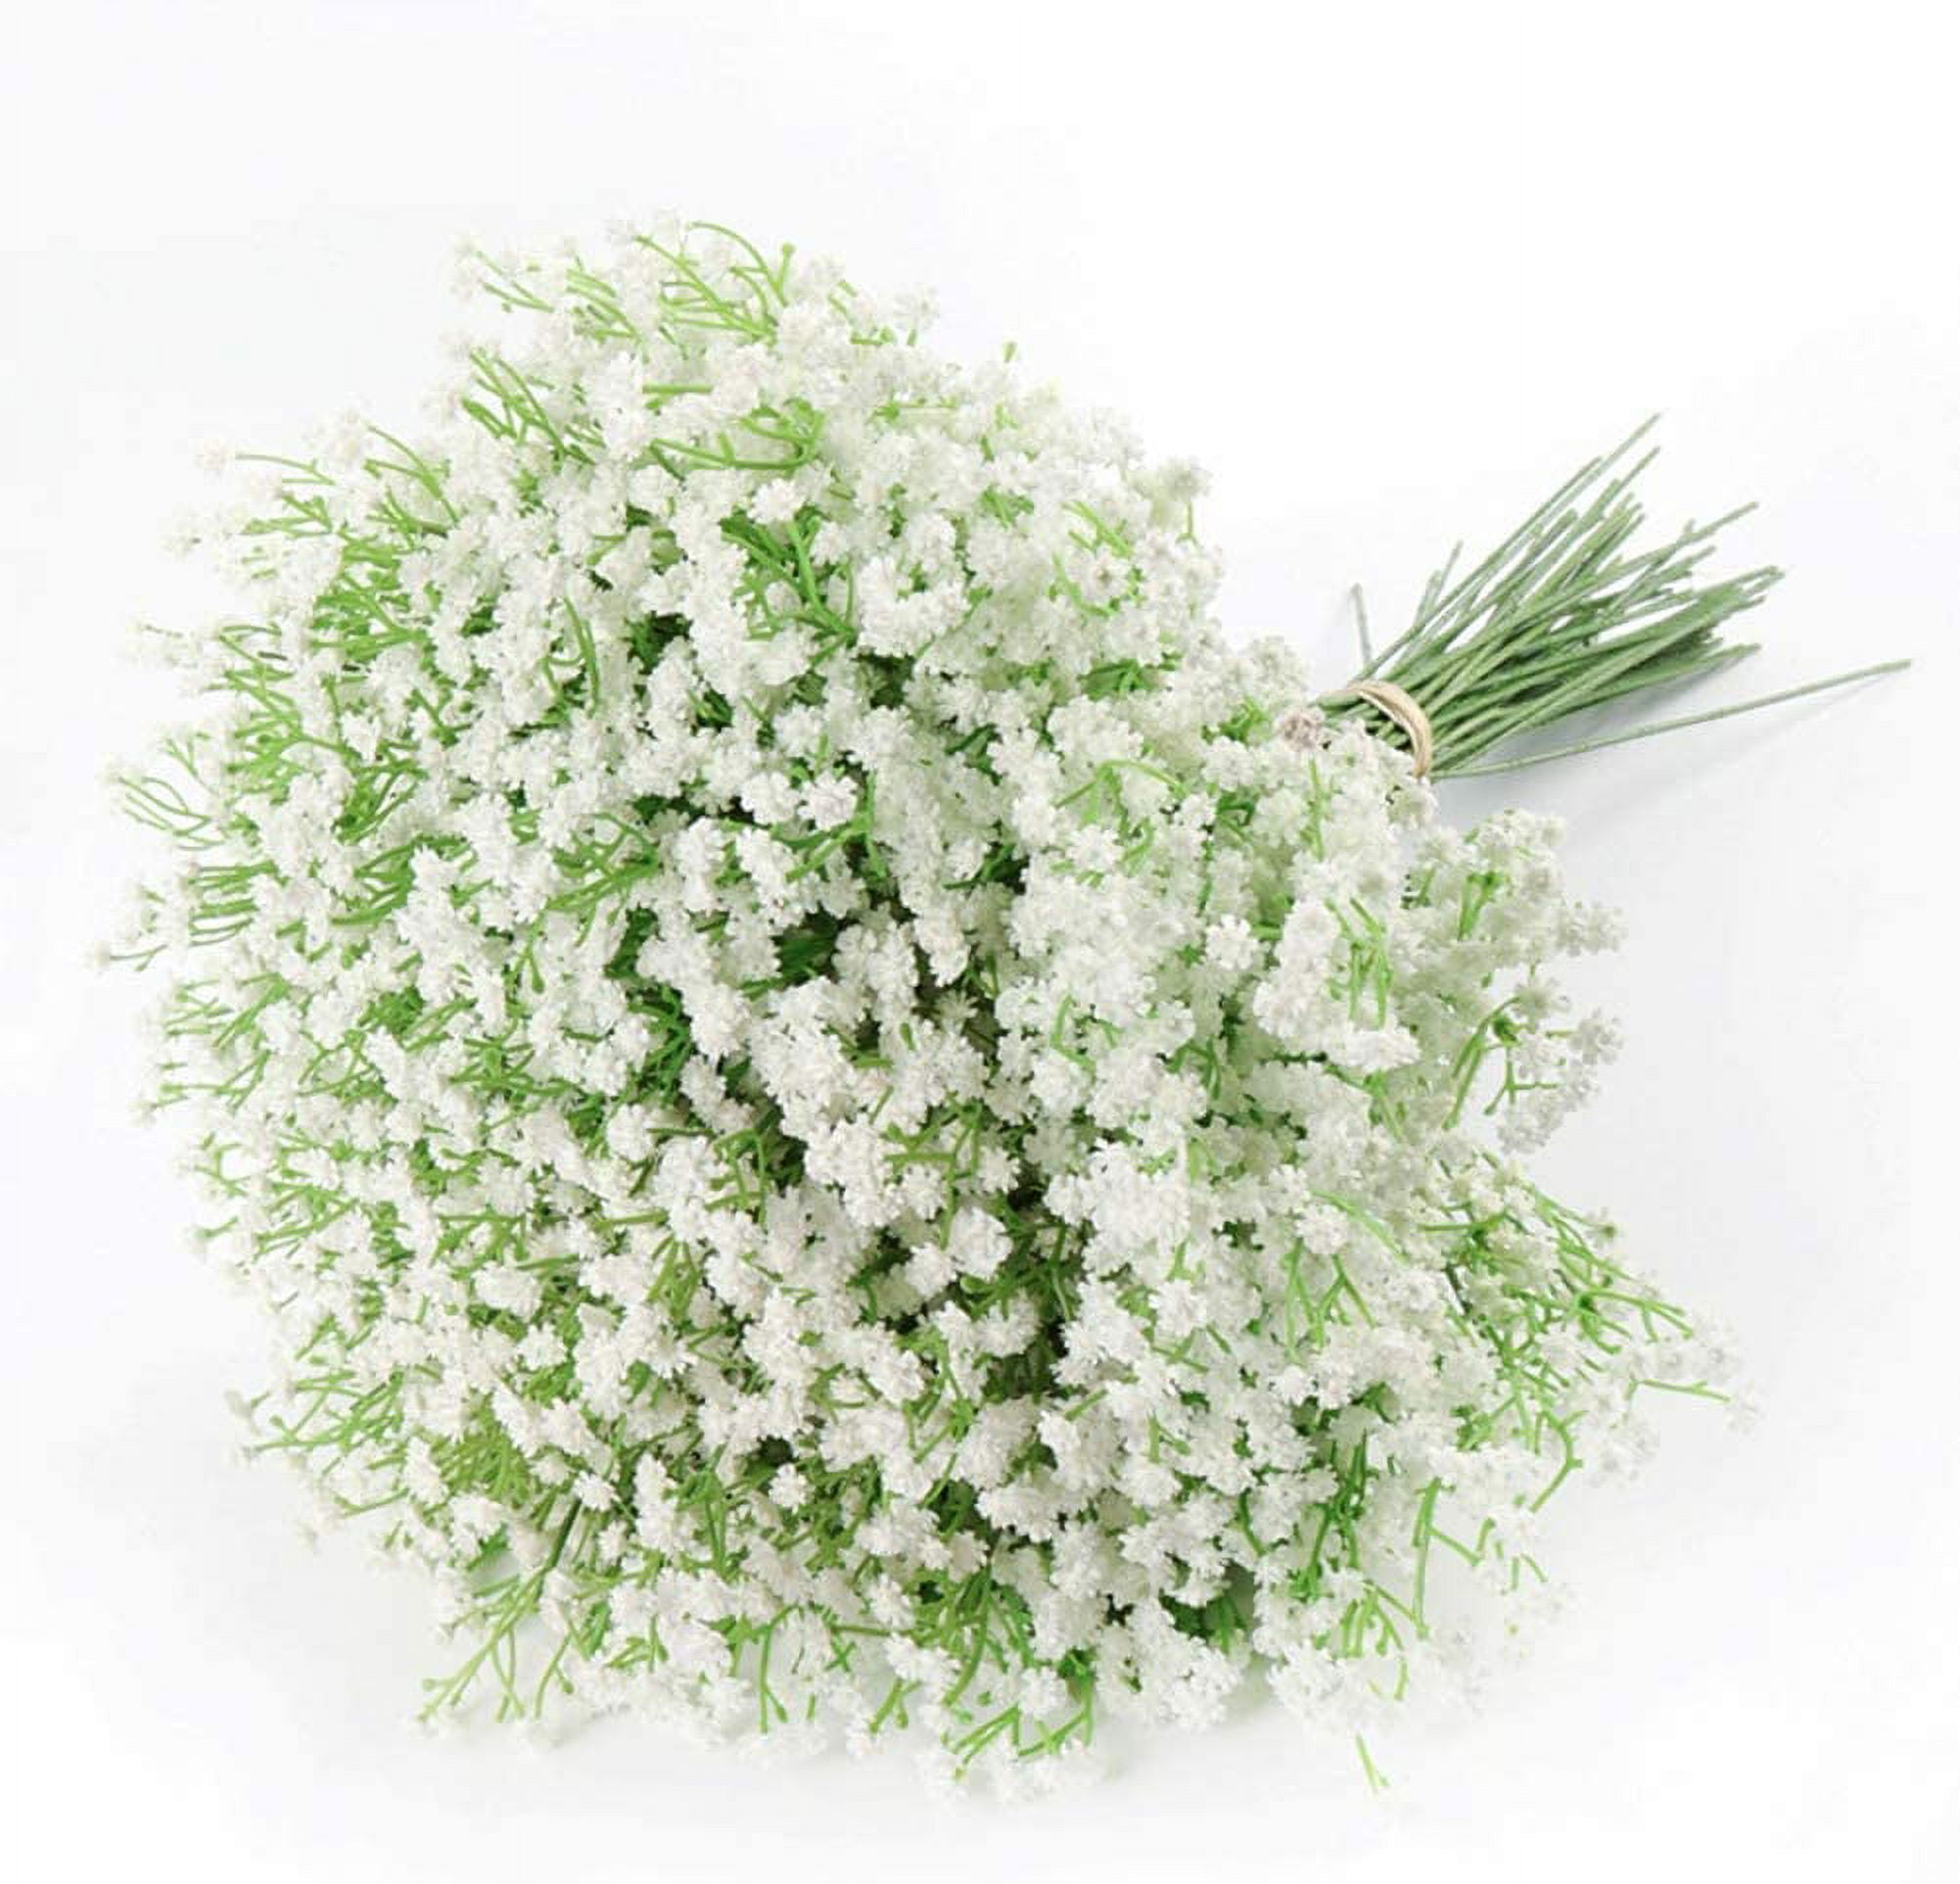  Sggvecsy 15 Pcs Babys Breath Artificial Flowers Gypsophila  Bouquets Bulk Real Touch Fake Silk Flowers for Home DIY Floral Arrangement  Table Centerpiece Fall Thanksgiving Autumn Decoration (Orange Red) : Home 